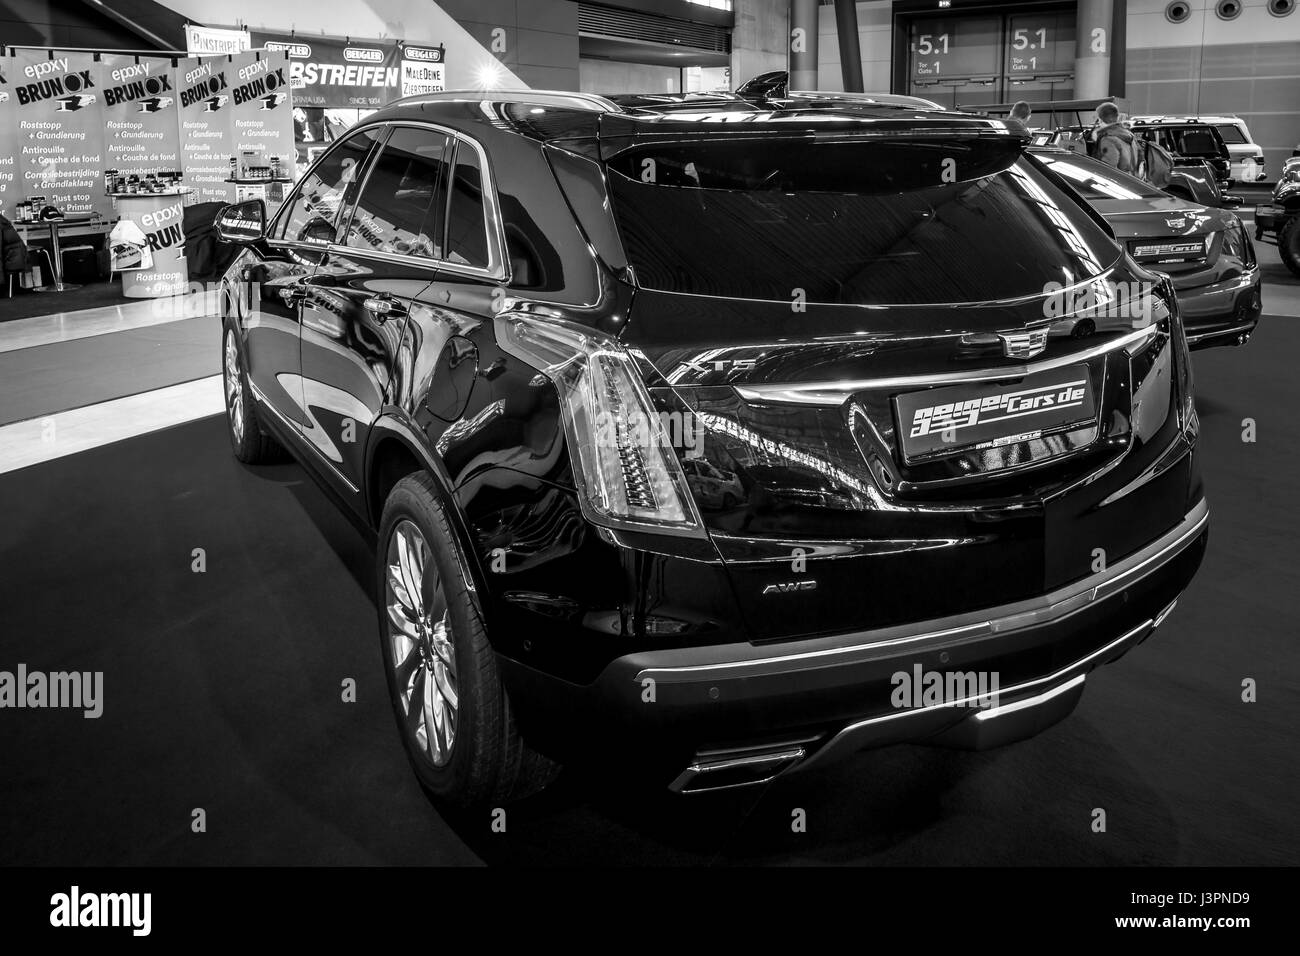 STUTTGART, GERMANY - MARCH 03, 2017: Mid-size luxury crossover SUV Cadillac XT5 Platinum, 2017. Rear view. Black and white. Europe's greatest classic car exhibition 'RETRO CLASSICS' Stock Photo